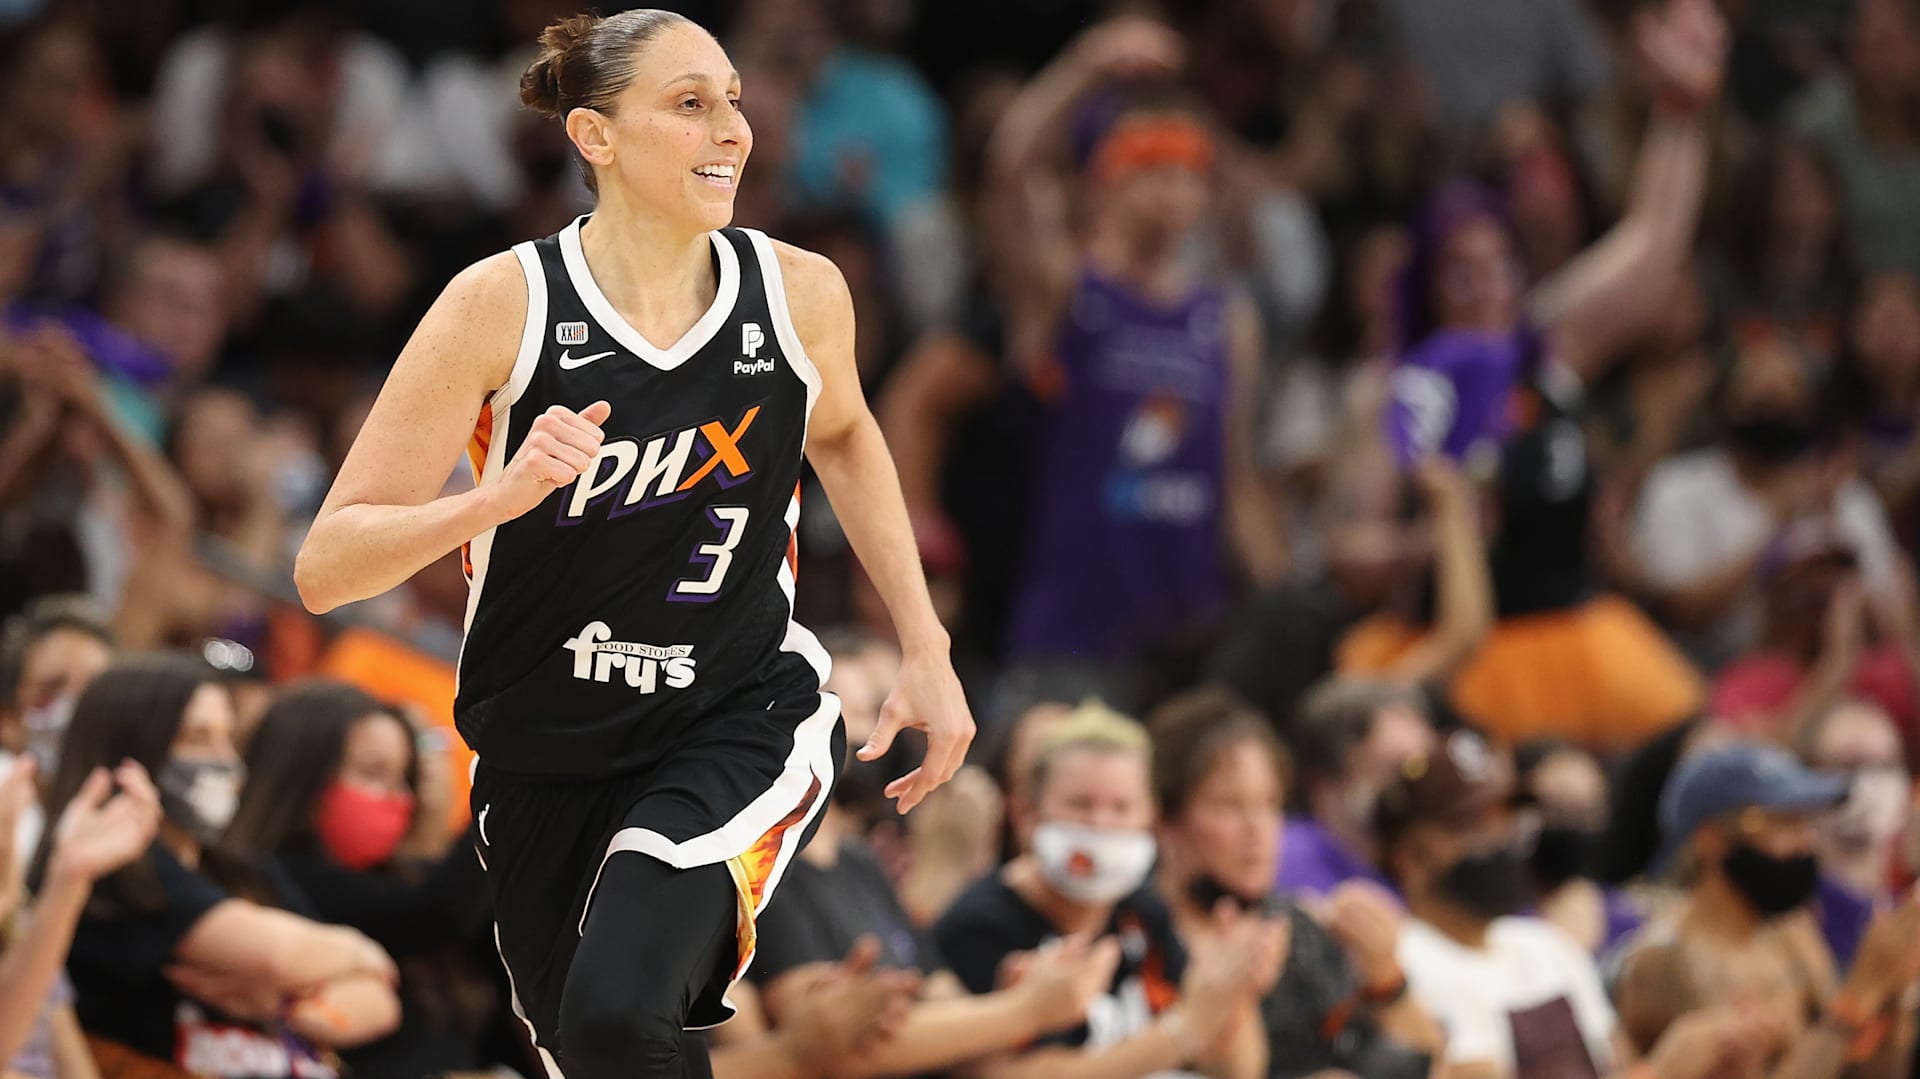 WNBA Moments to Debut on Top Shot